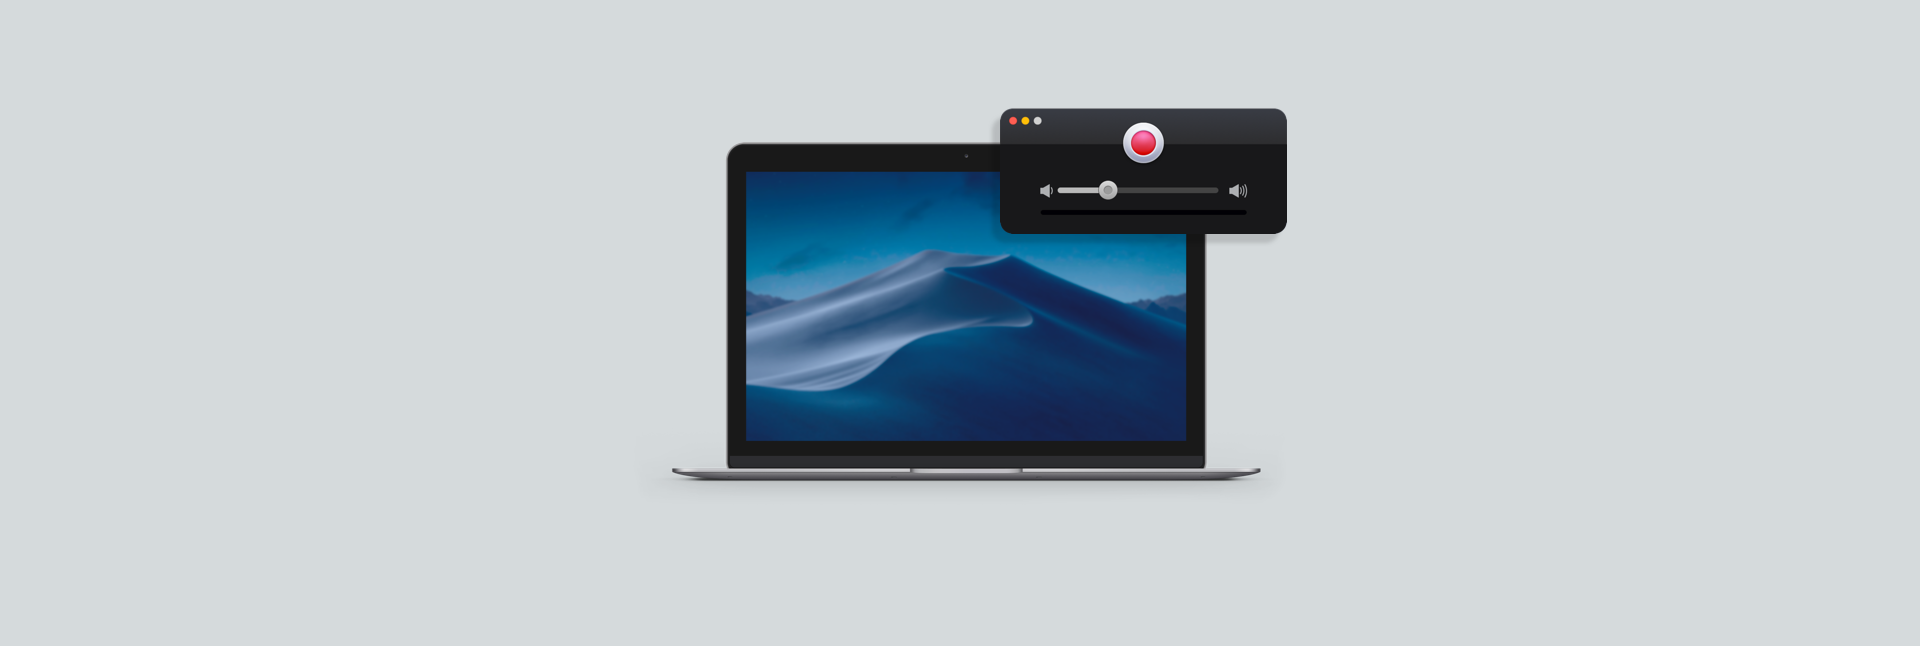 best screen and audio recorder for mac